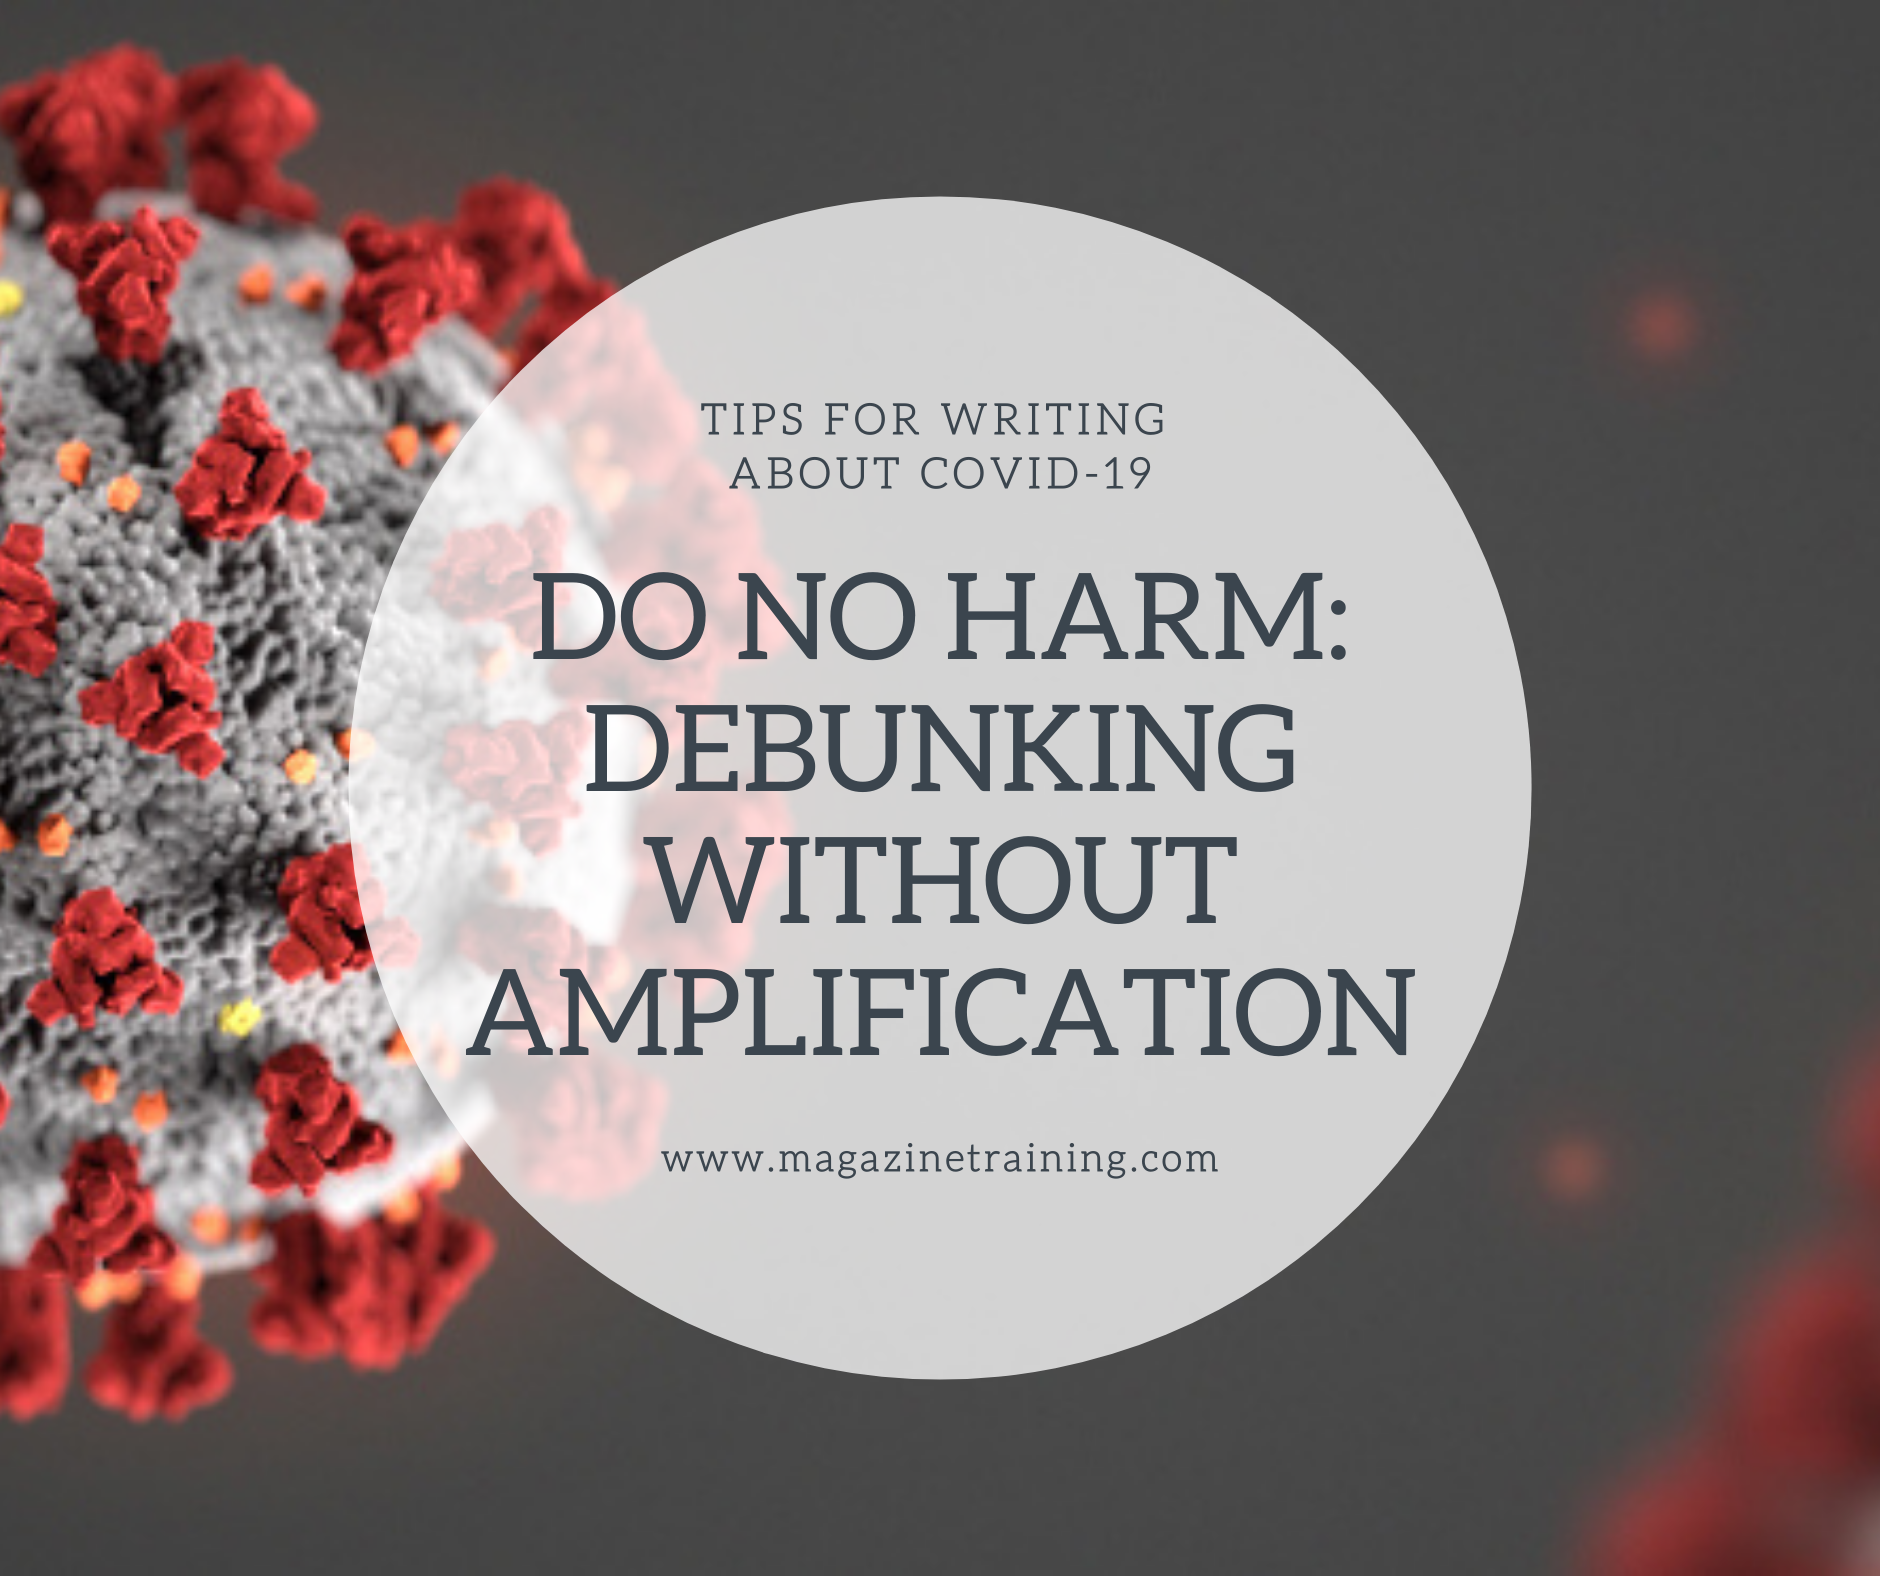 debunking without amplification